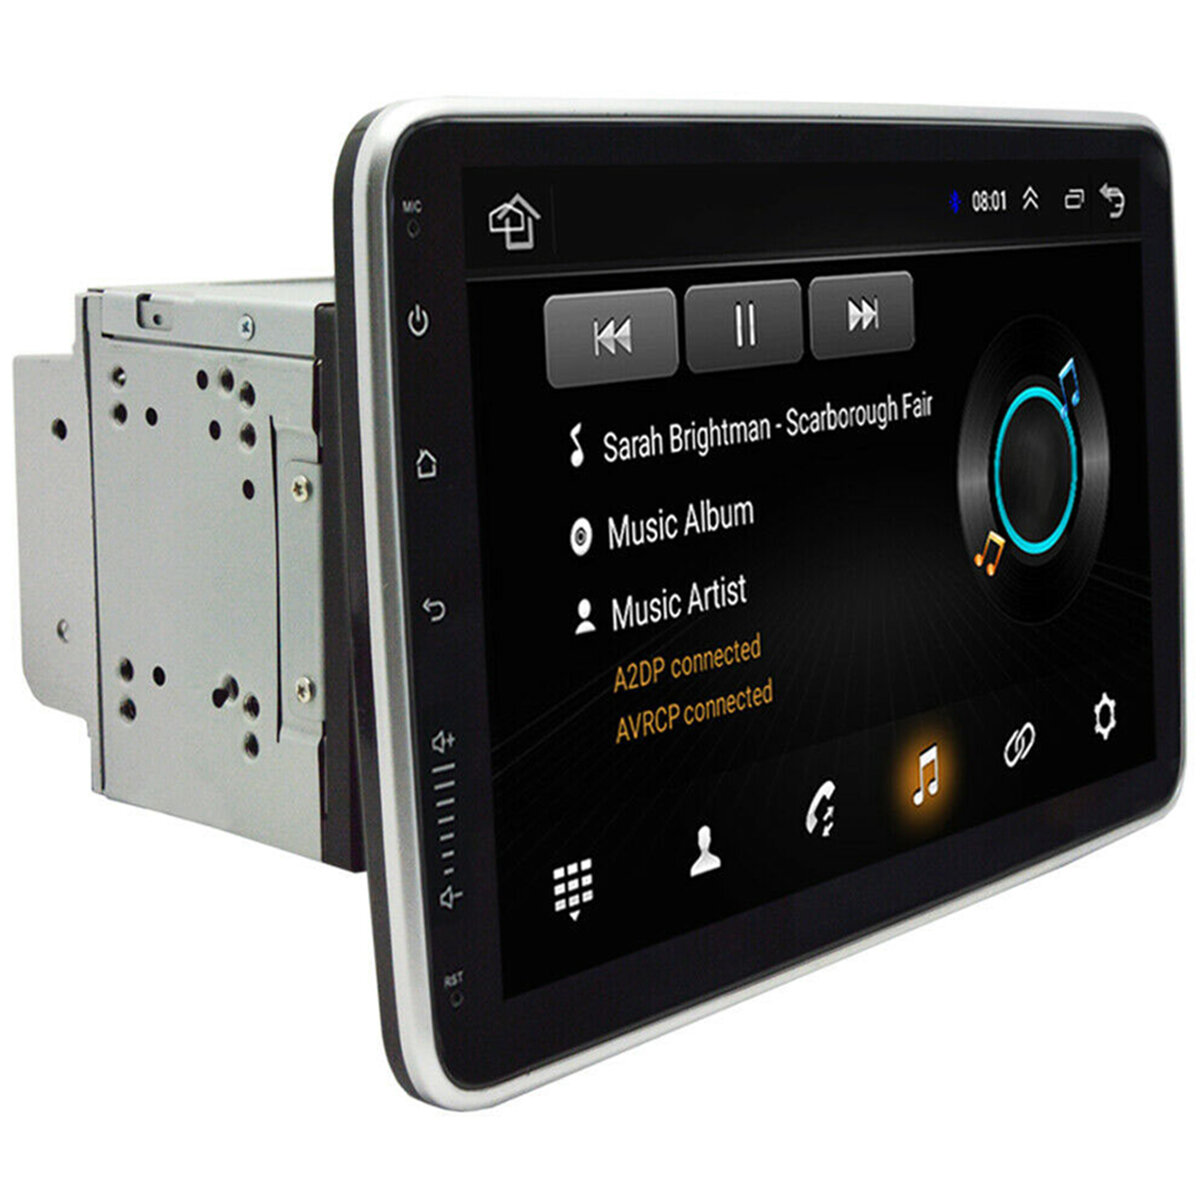 Double Spindle 10.1 Inch General Android Navigation Machine 360 Degree Rotation Car Stereo